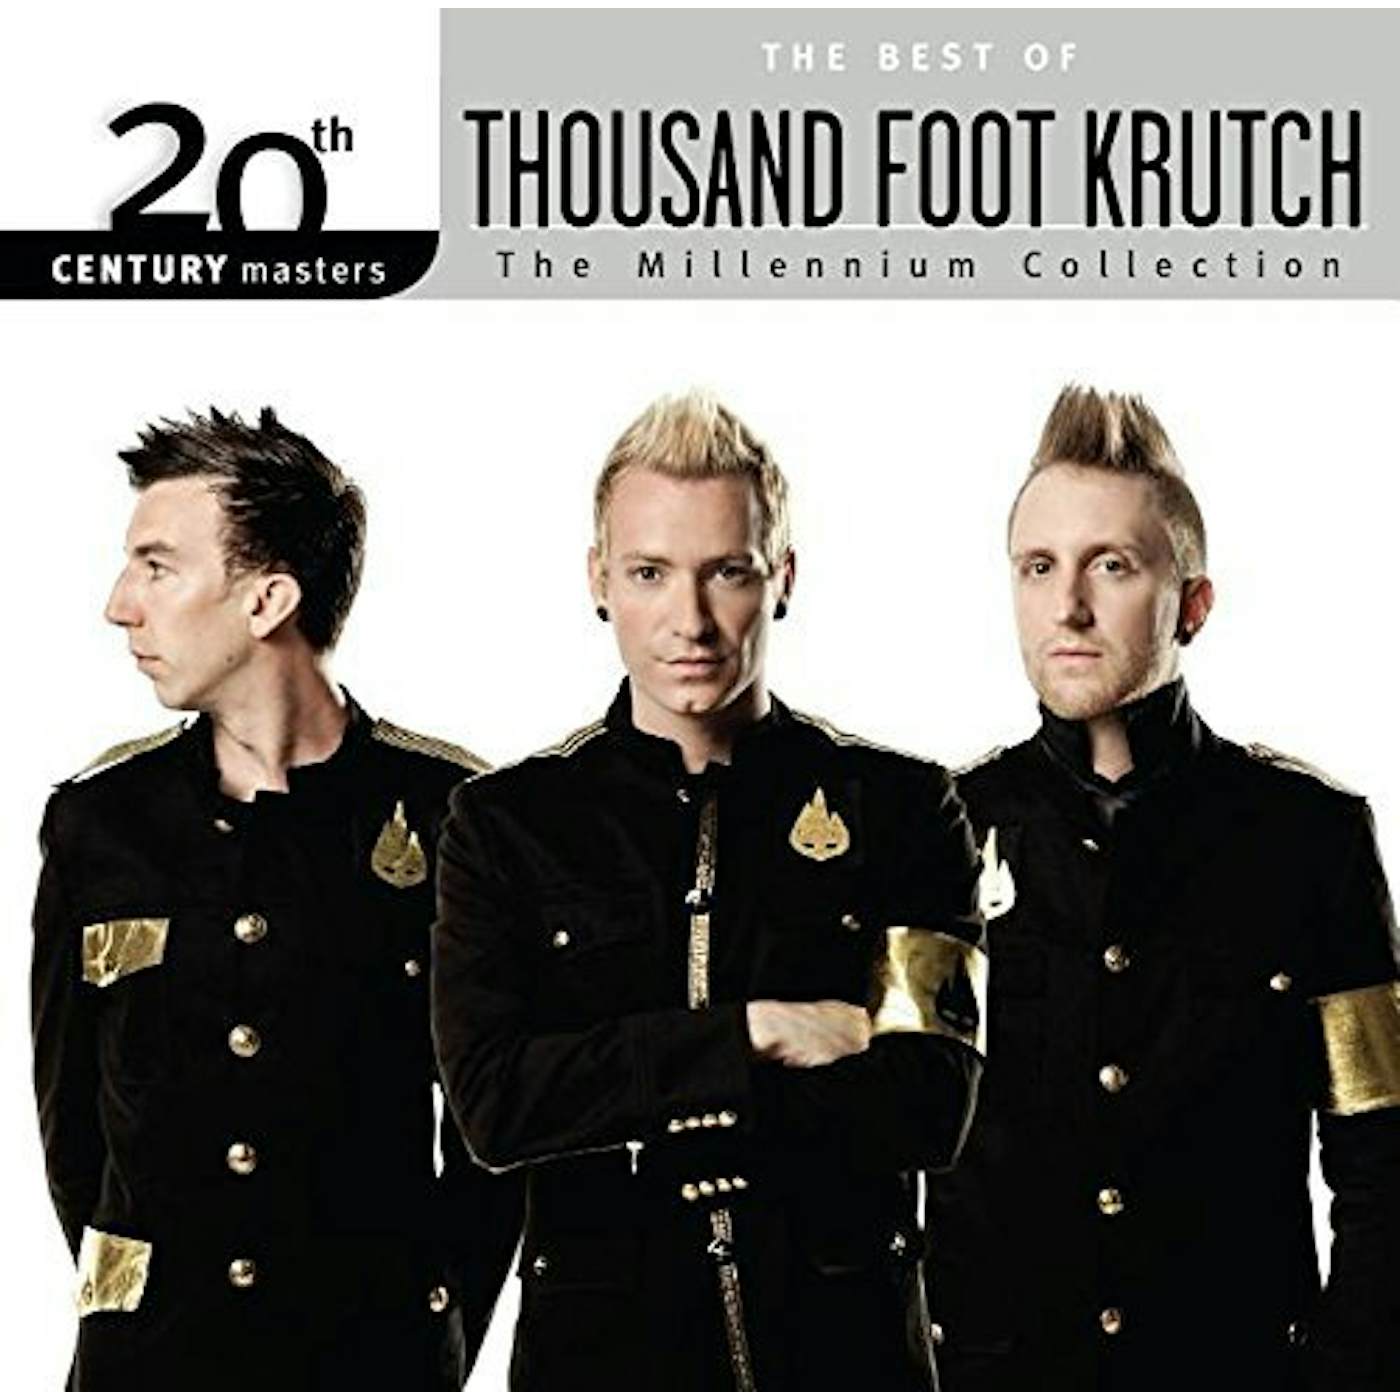 Thousand Foot Krutch MILLENNIUM COLLECTION: 20TH CENTURY MASTERS CD